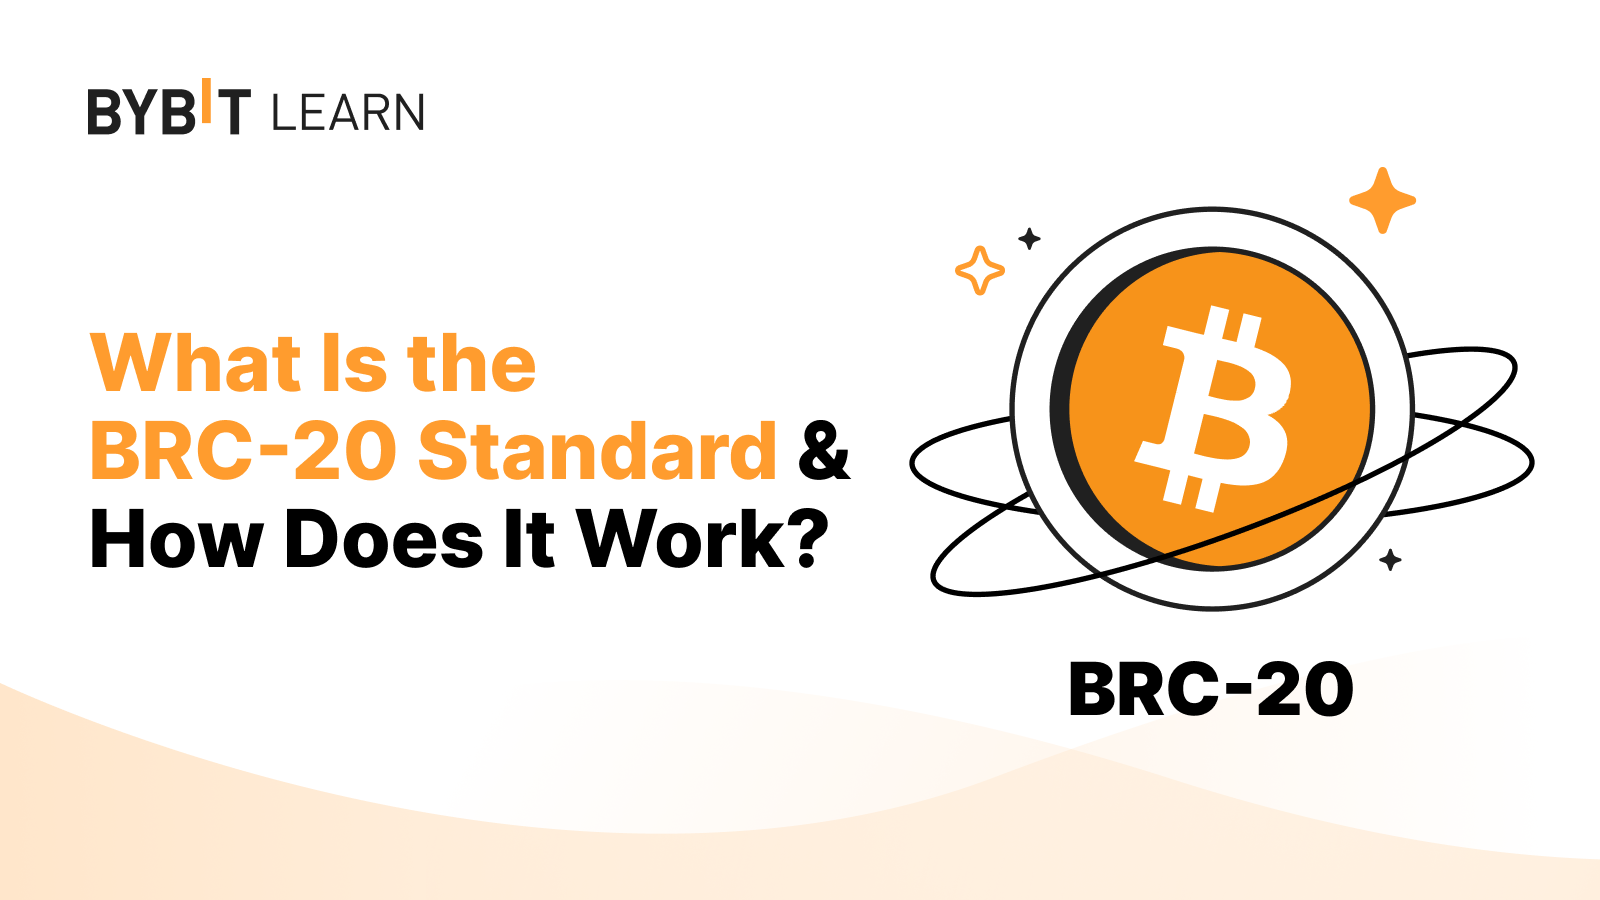 What Is the BRC-20 Standard & How Does It Work?